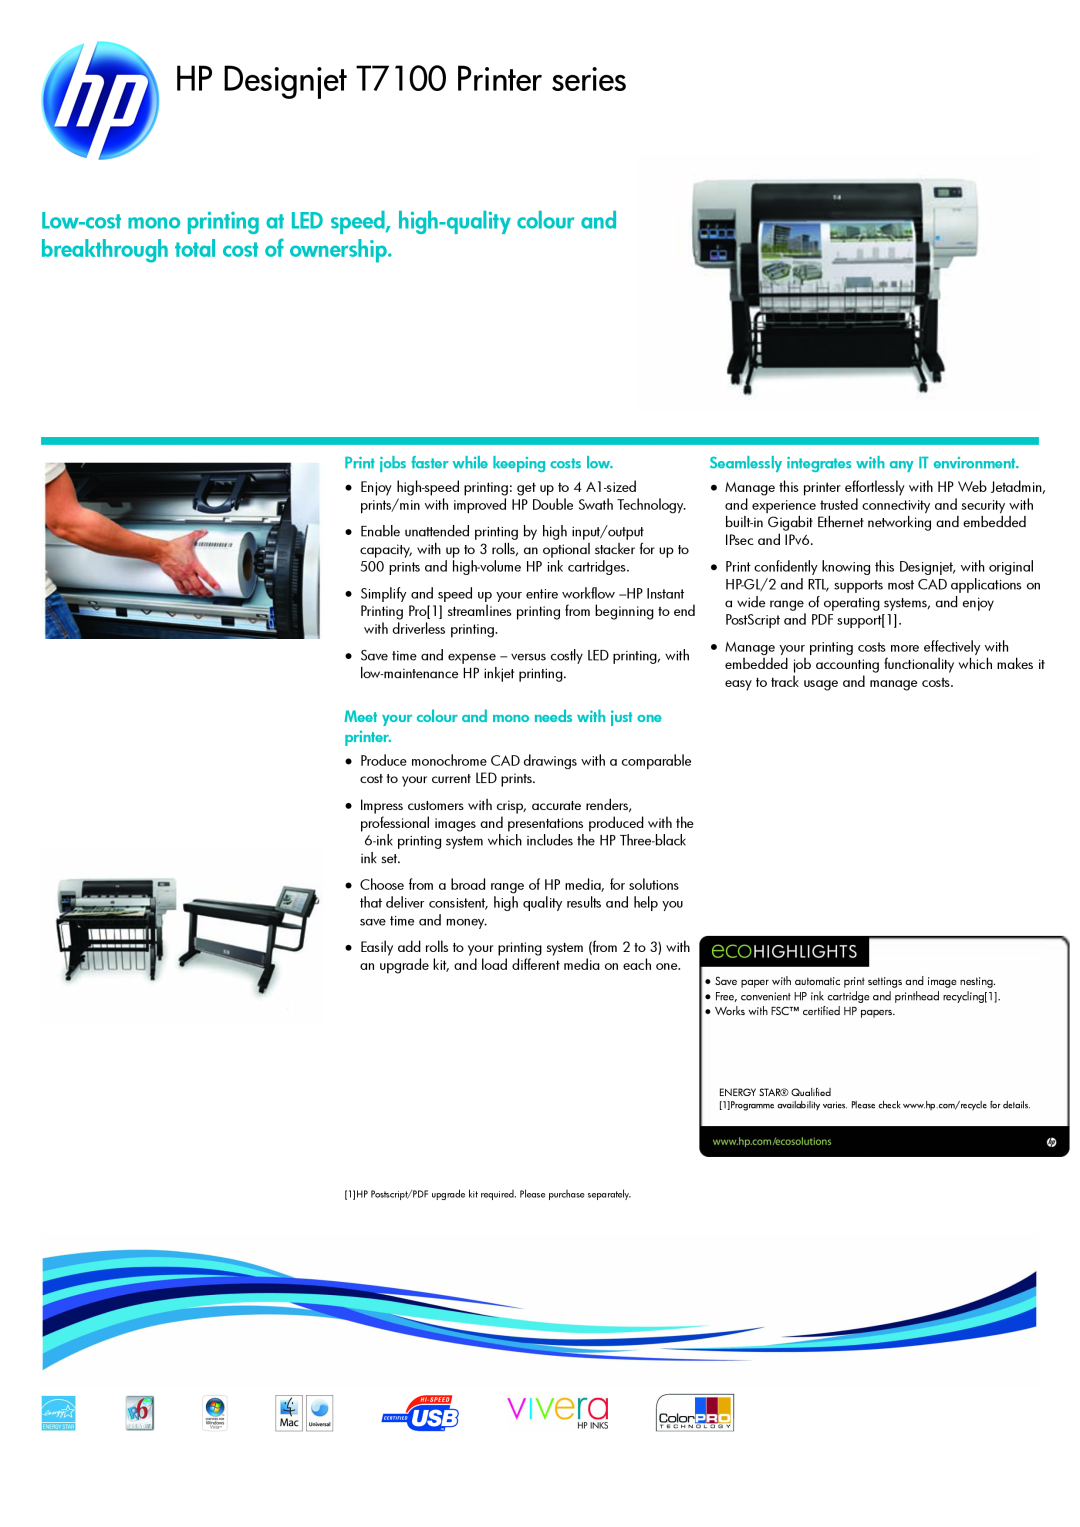 HP manual HP Designjet T7100 Printer series, Print jobs faster while keeping costs low 